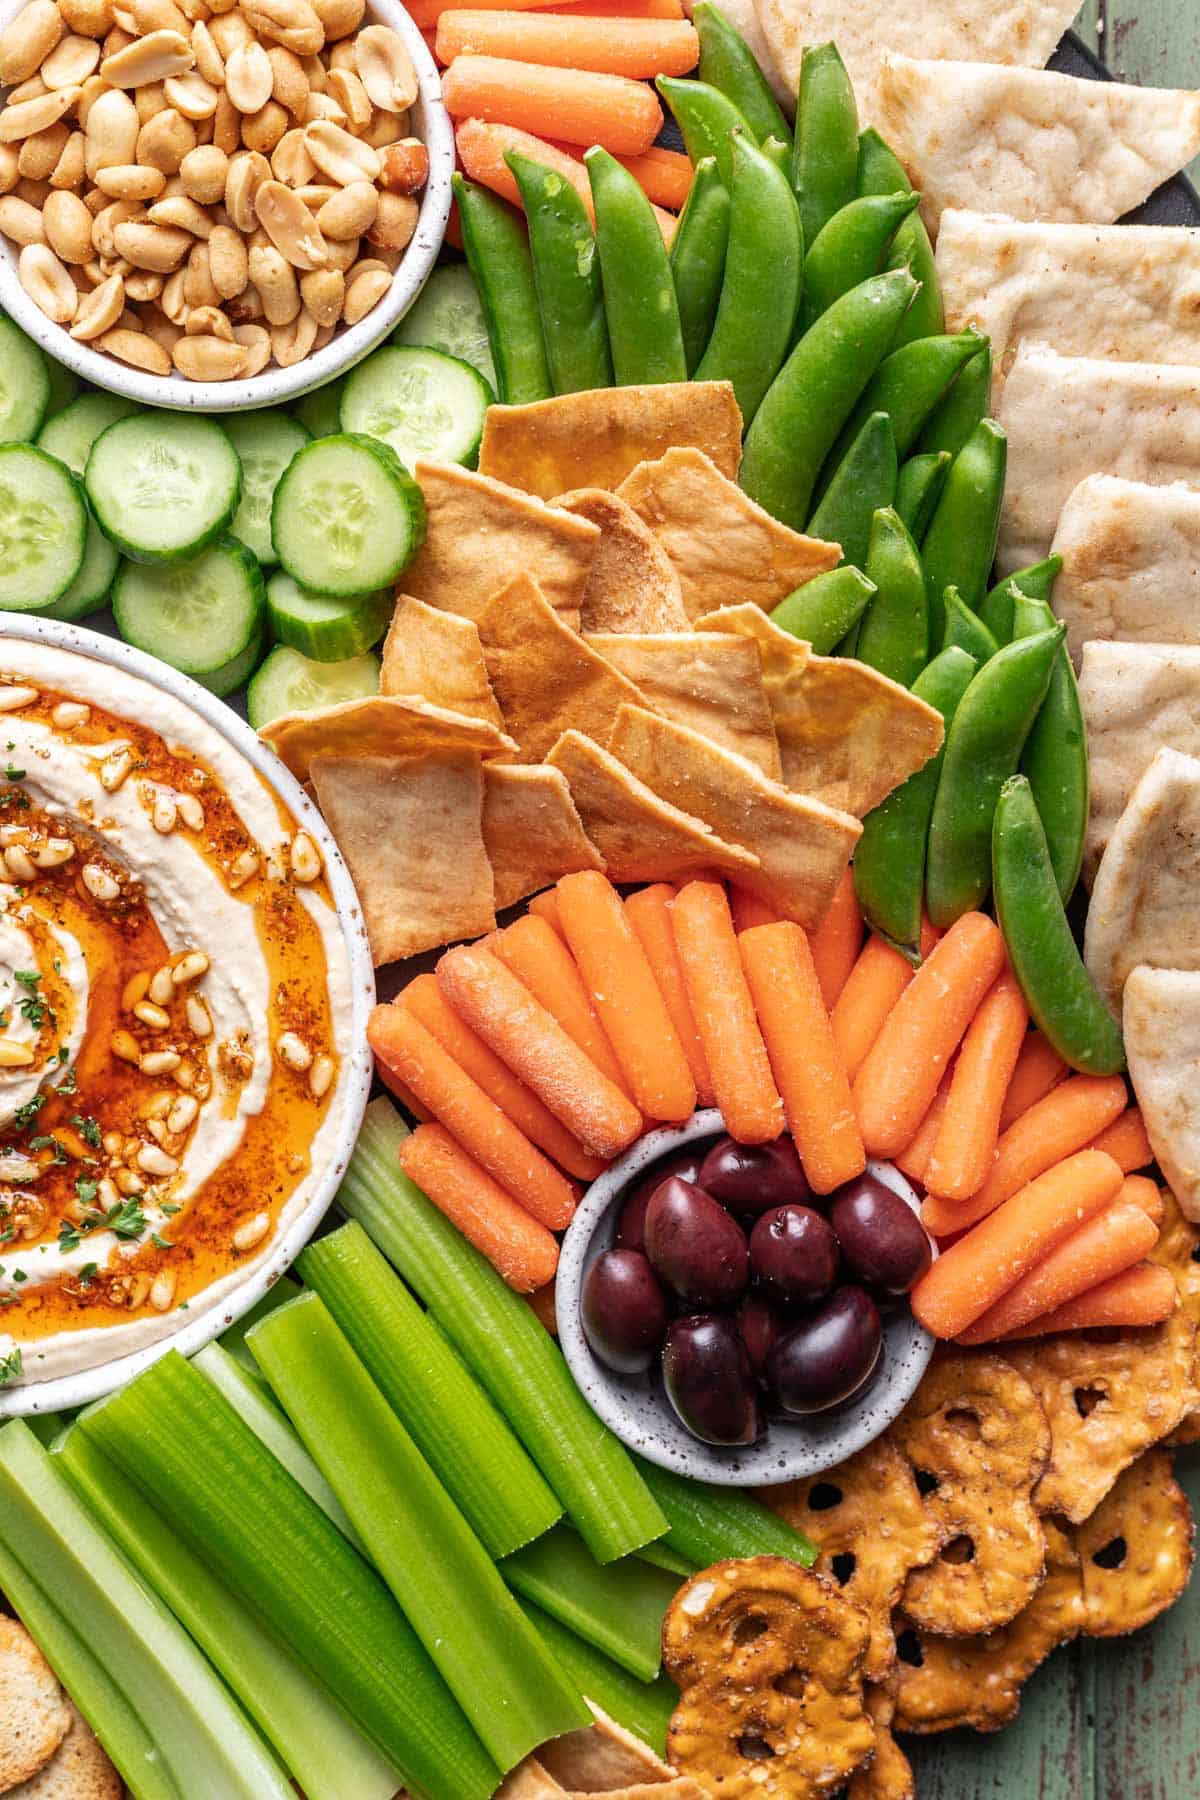 Snacks arranged on a board, like cucumbers, olives, pita chips, snap peas, and celery.